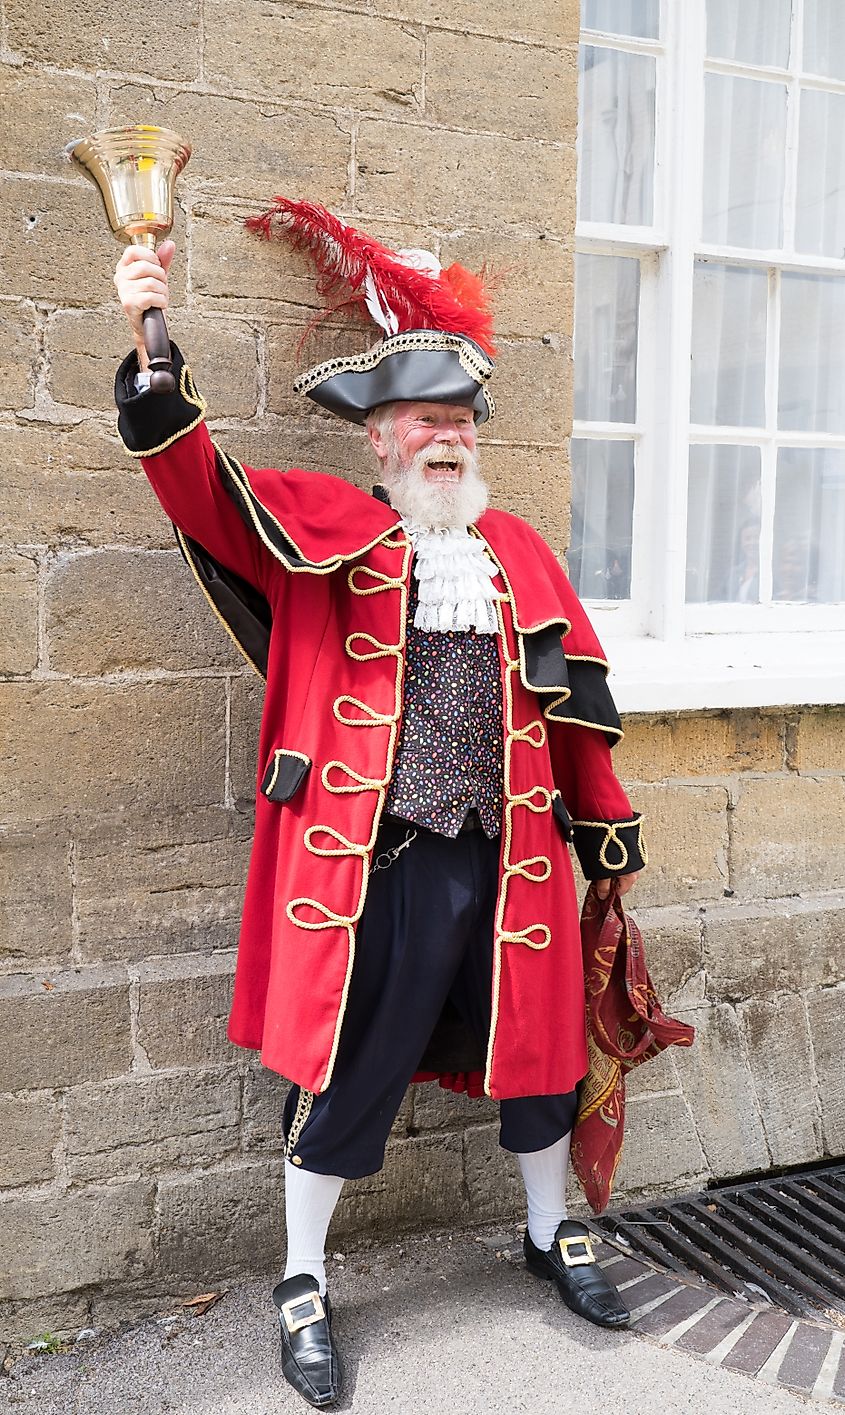 Man in a red and gold Town Crier costume entertains visitors on the streets of Bridport. Image by Johann Knox via Shutterstock.com